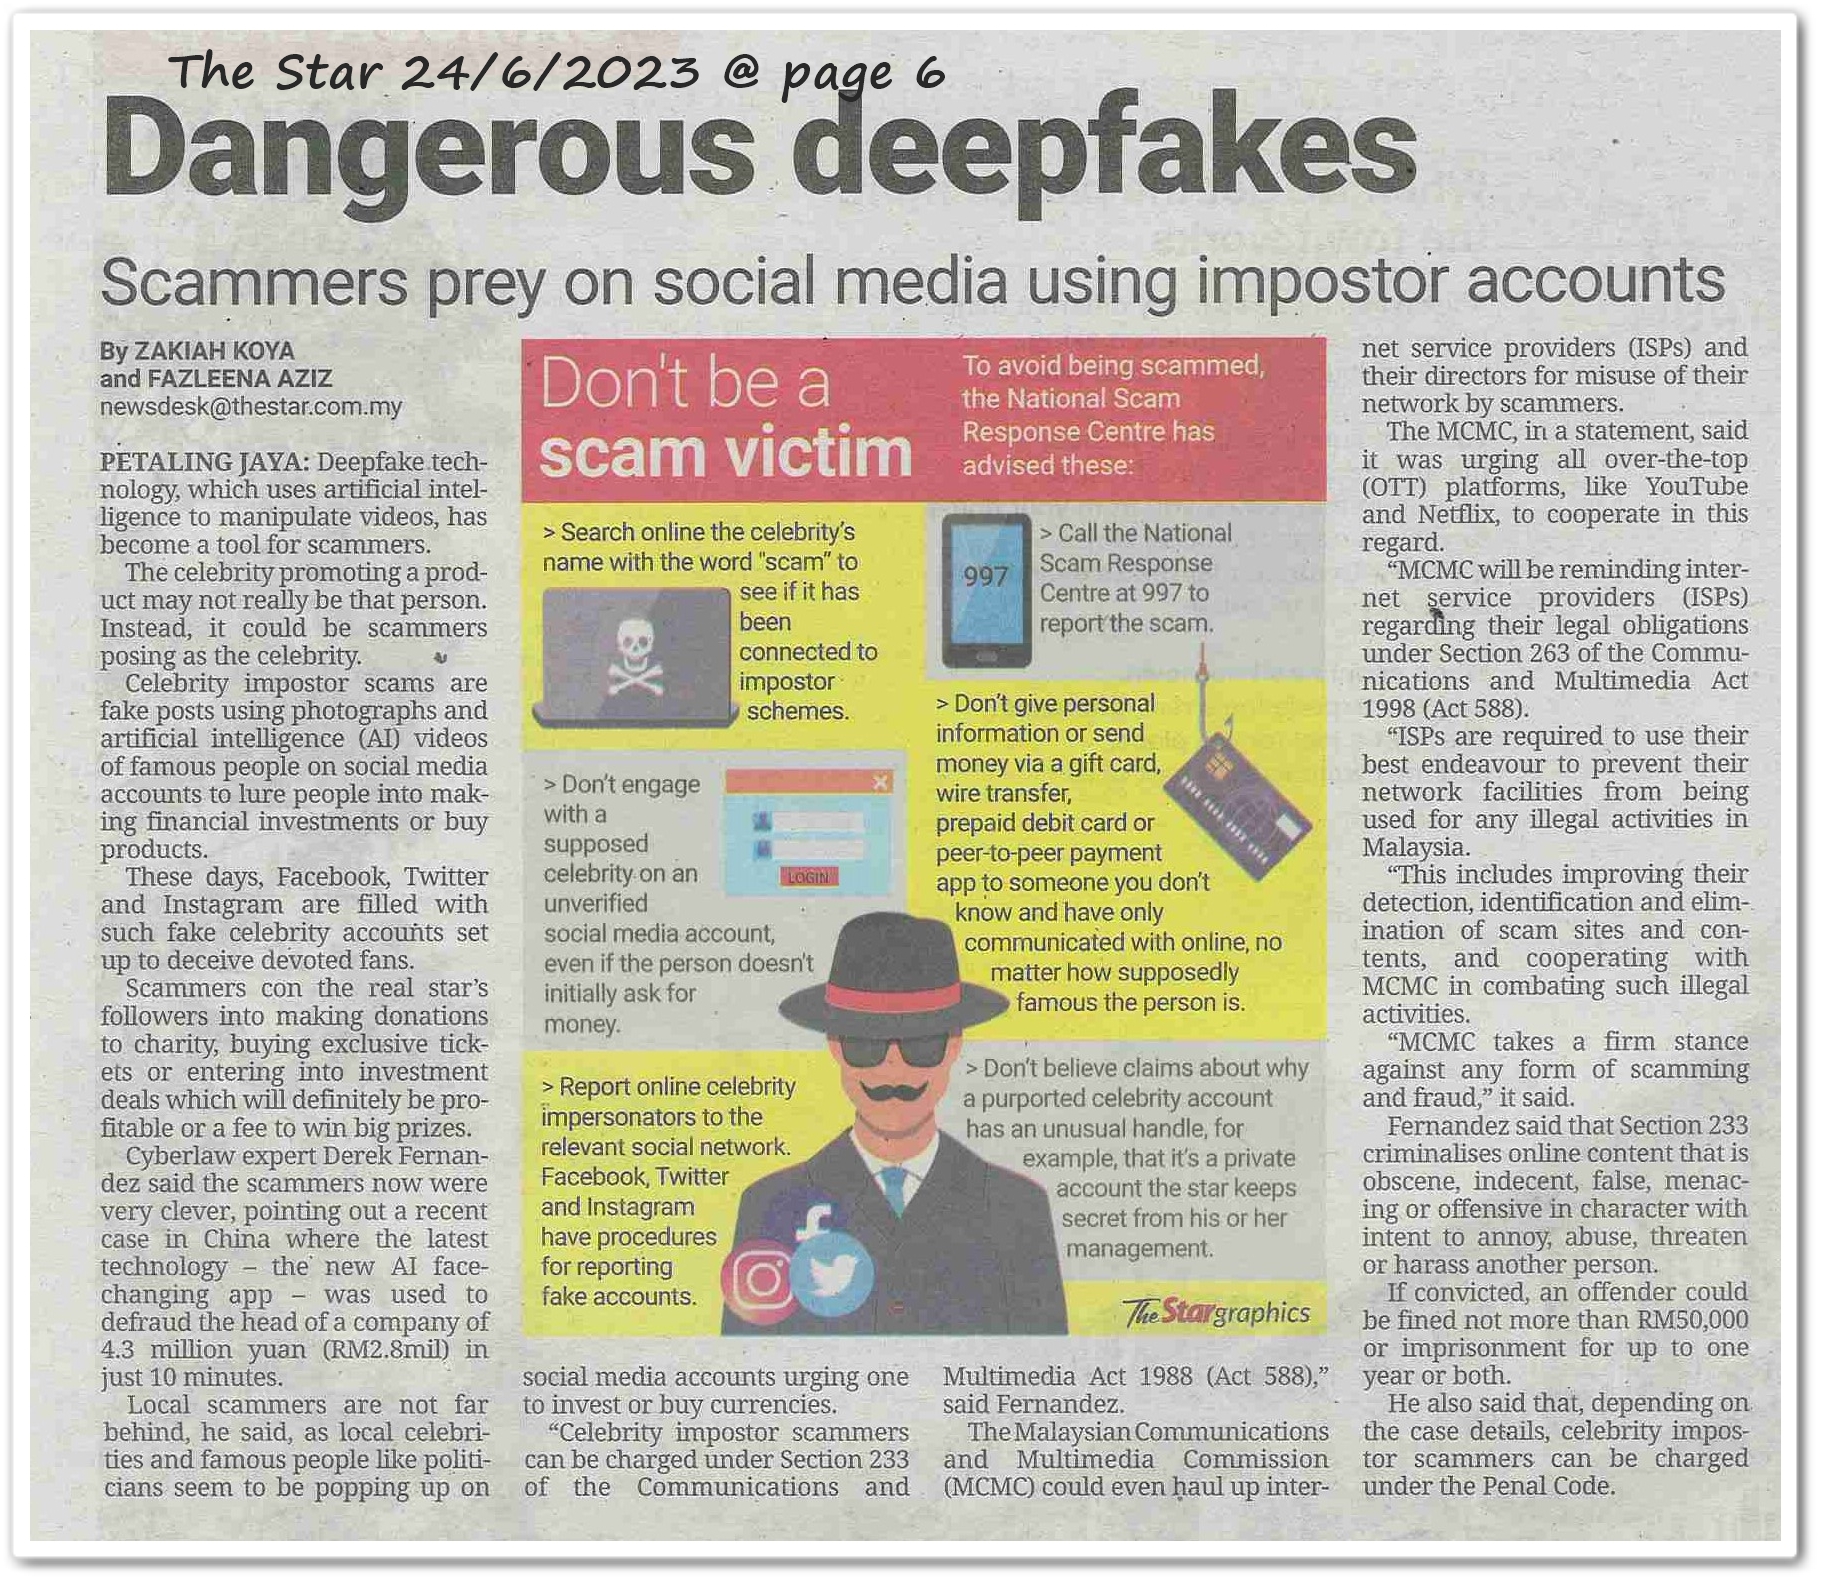 Dangerous deepfakes ; Meta directors can be taken to court for harmful content ; Celebs warn of their names used as lures by scammers - Keratan akhbar The Star 24 June 2023